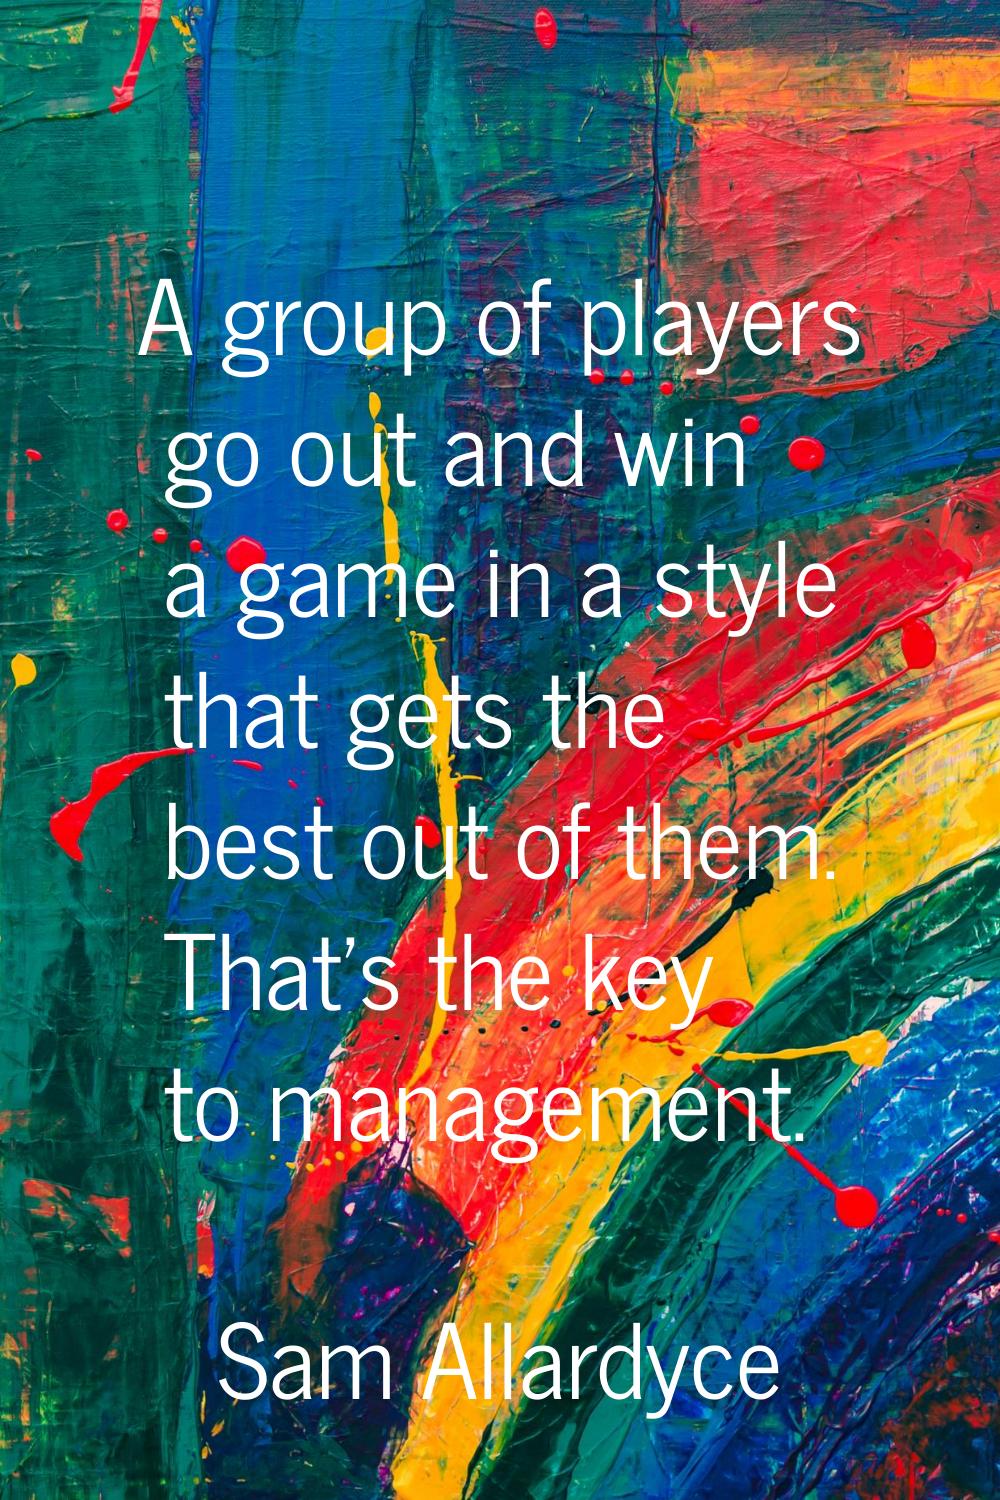 A group of players go out and win a game in a style that gets the best out of them. That's the key 